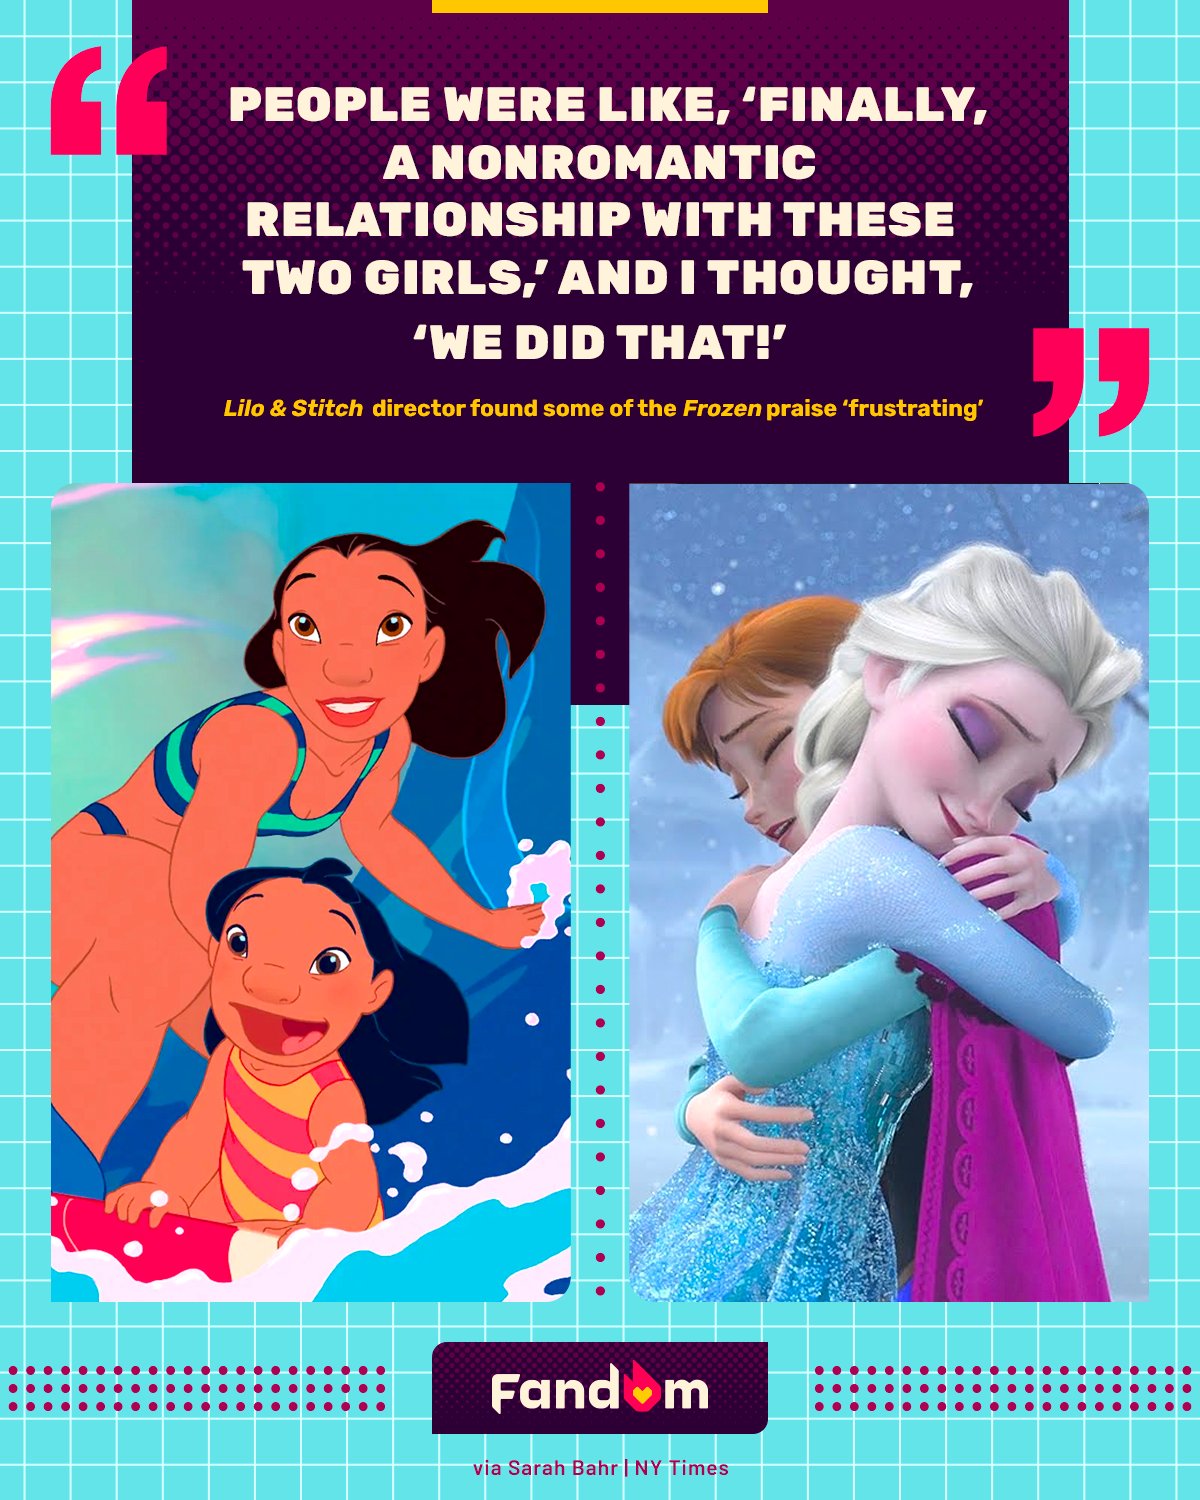 Lilo & Stitch' Director Is 'Frustrated' Over 'Frozen': 'We Did